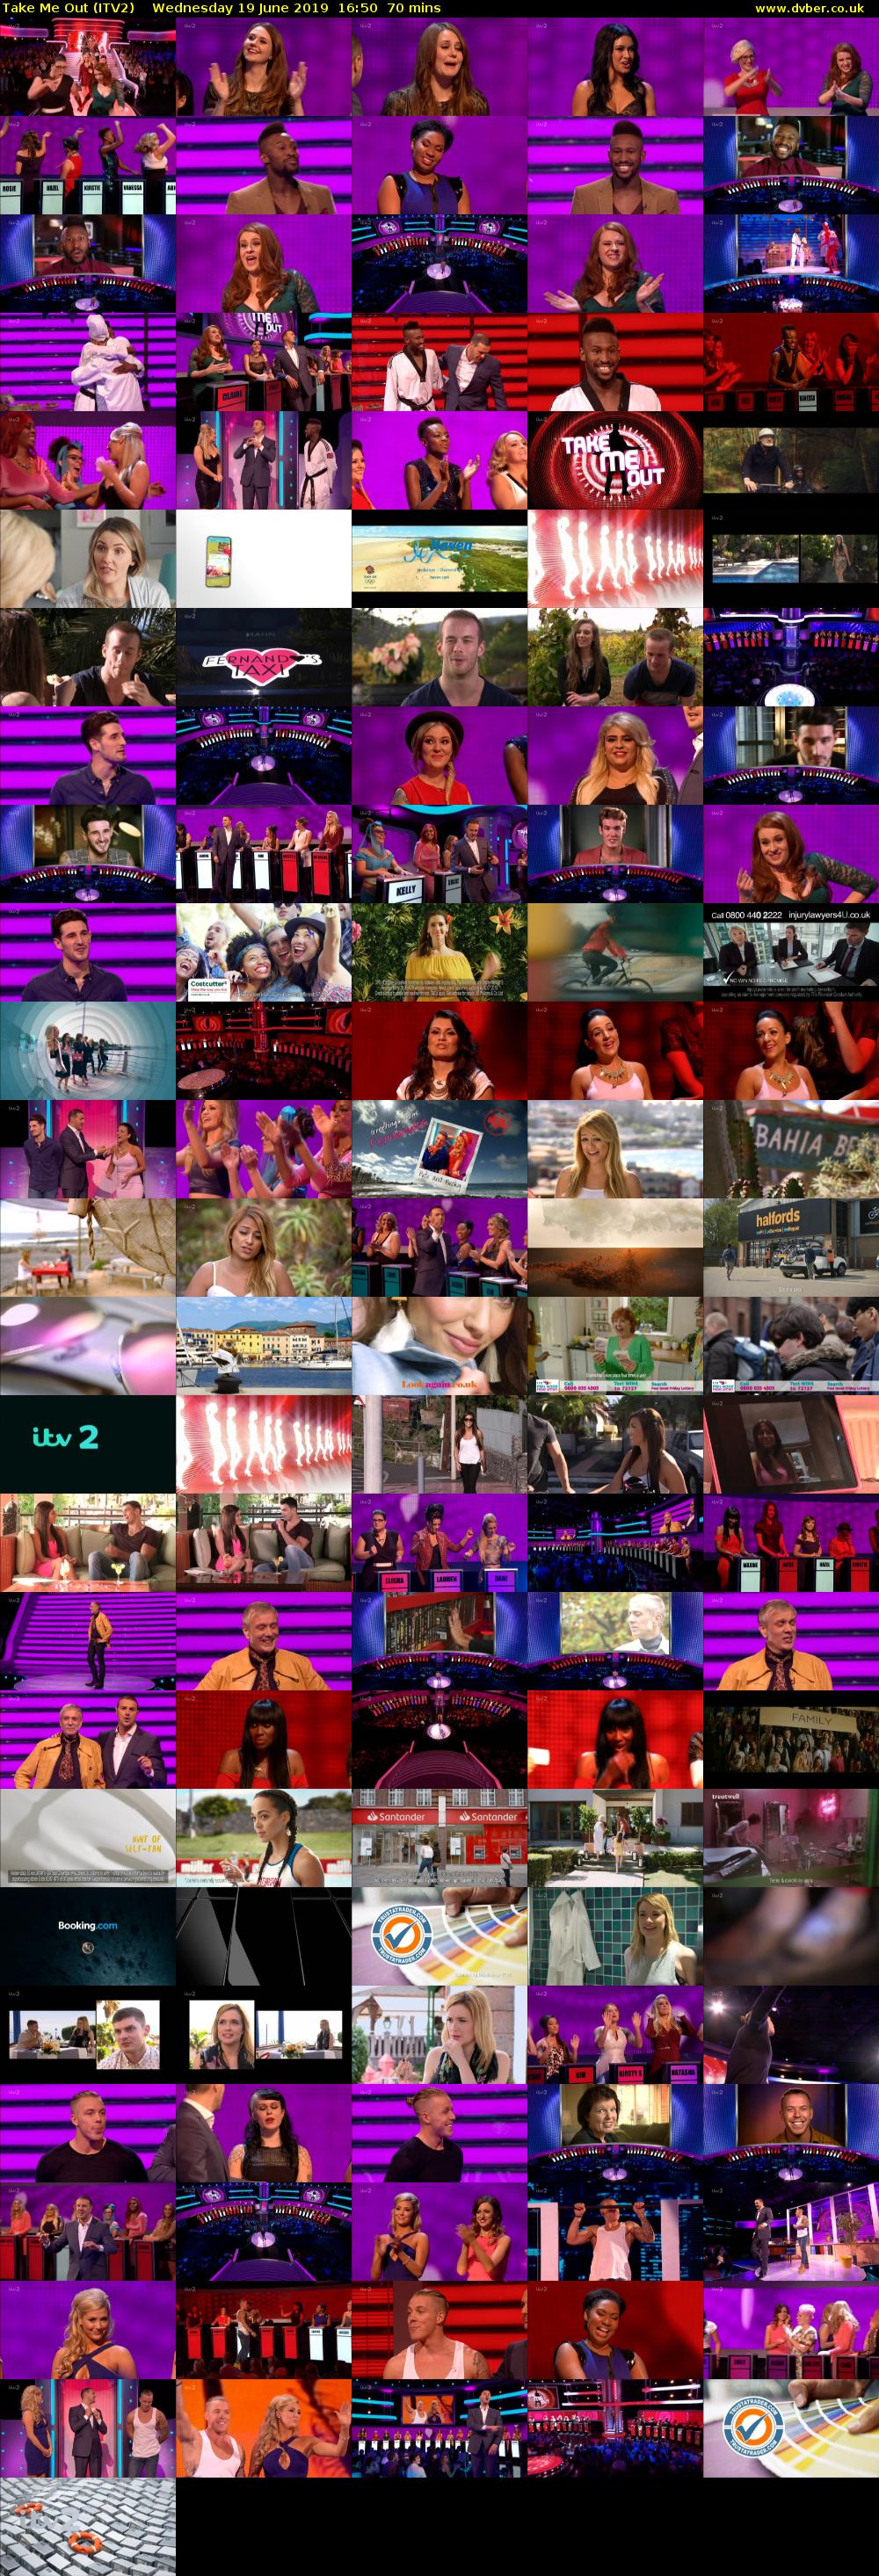 Take Me Out (ITV2) Wednesday 19 June 2019 16:50 - 18:00